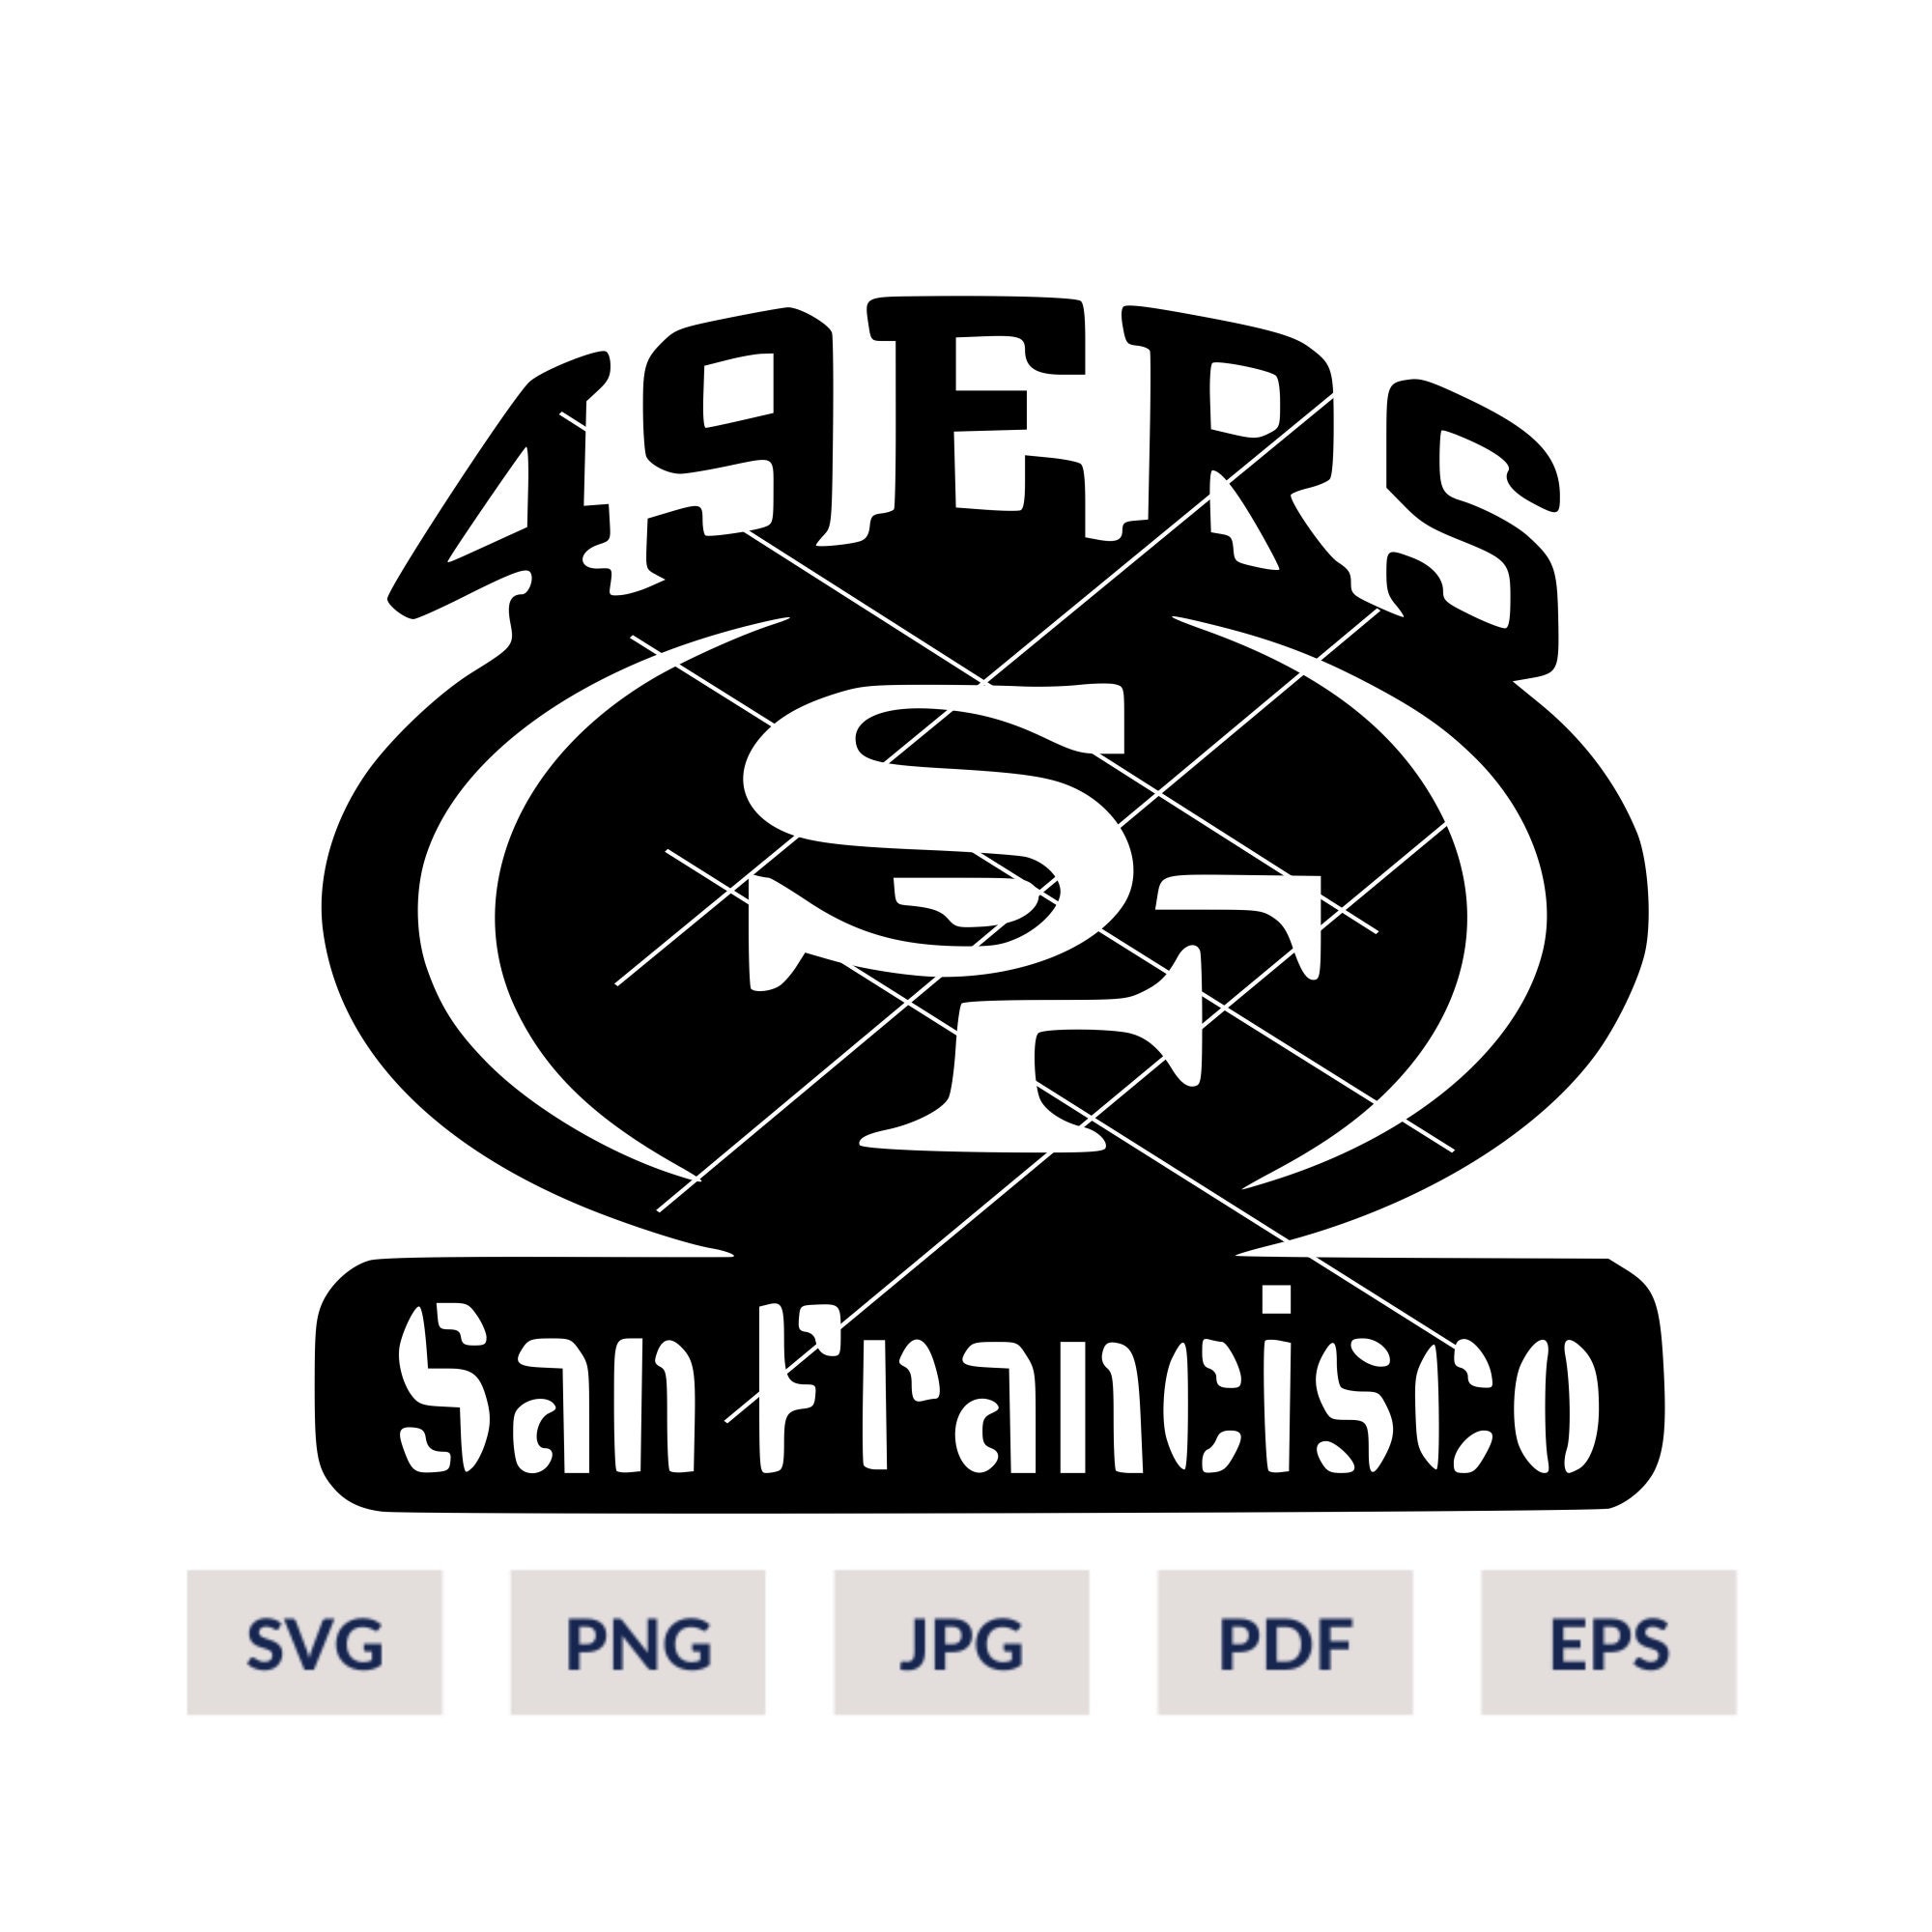 San Francisco 49ers Tumbler Wrap – Central State Printing